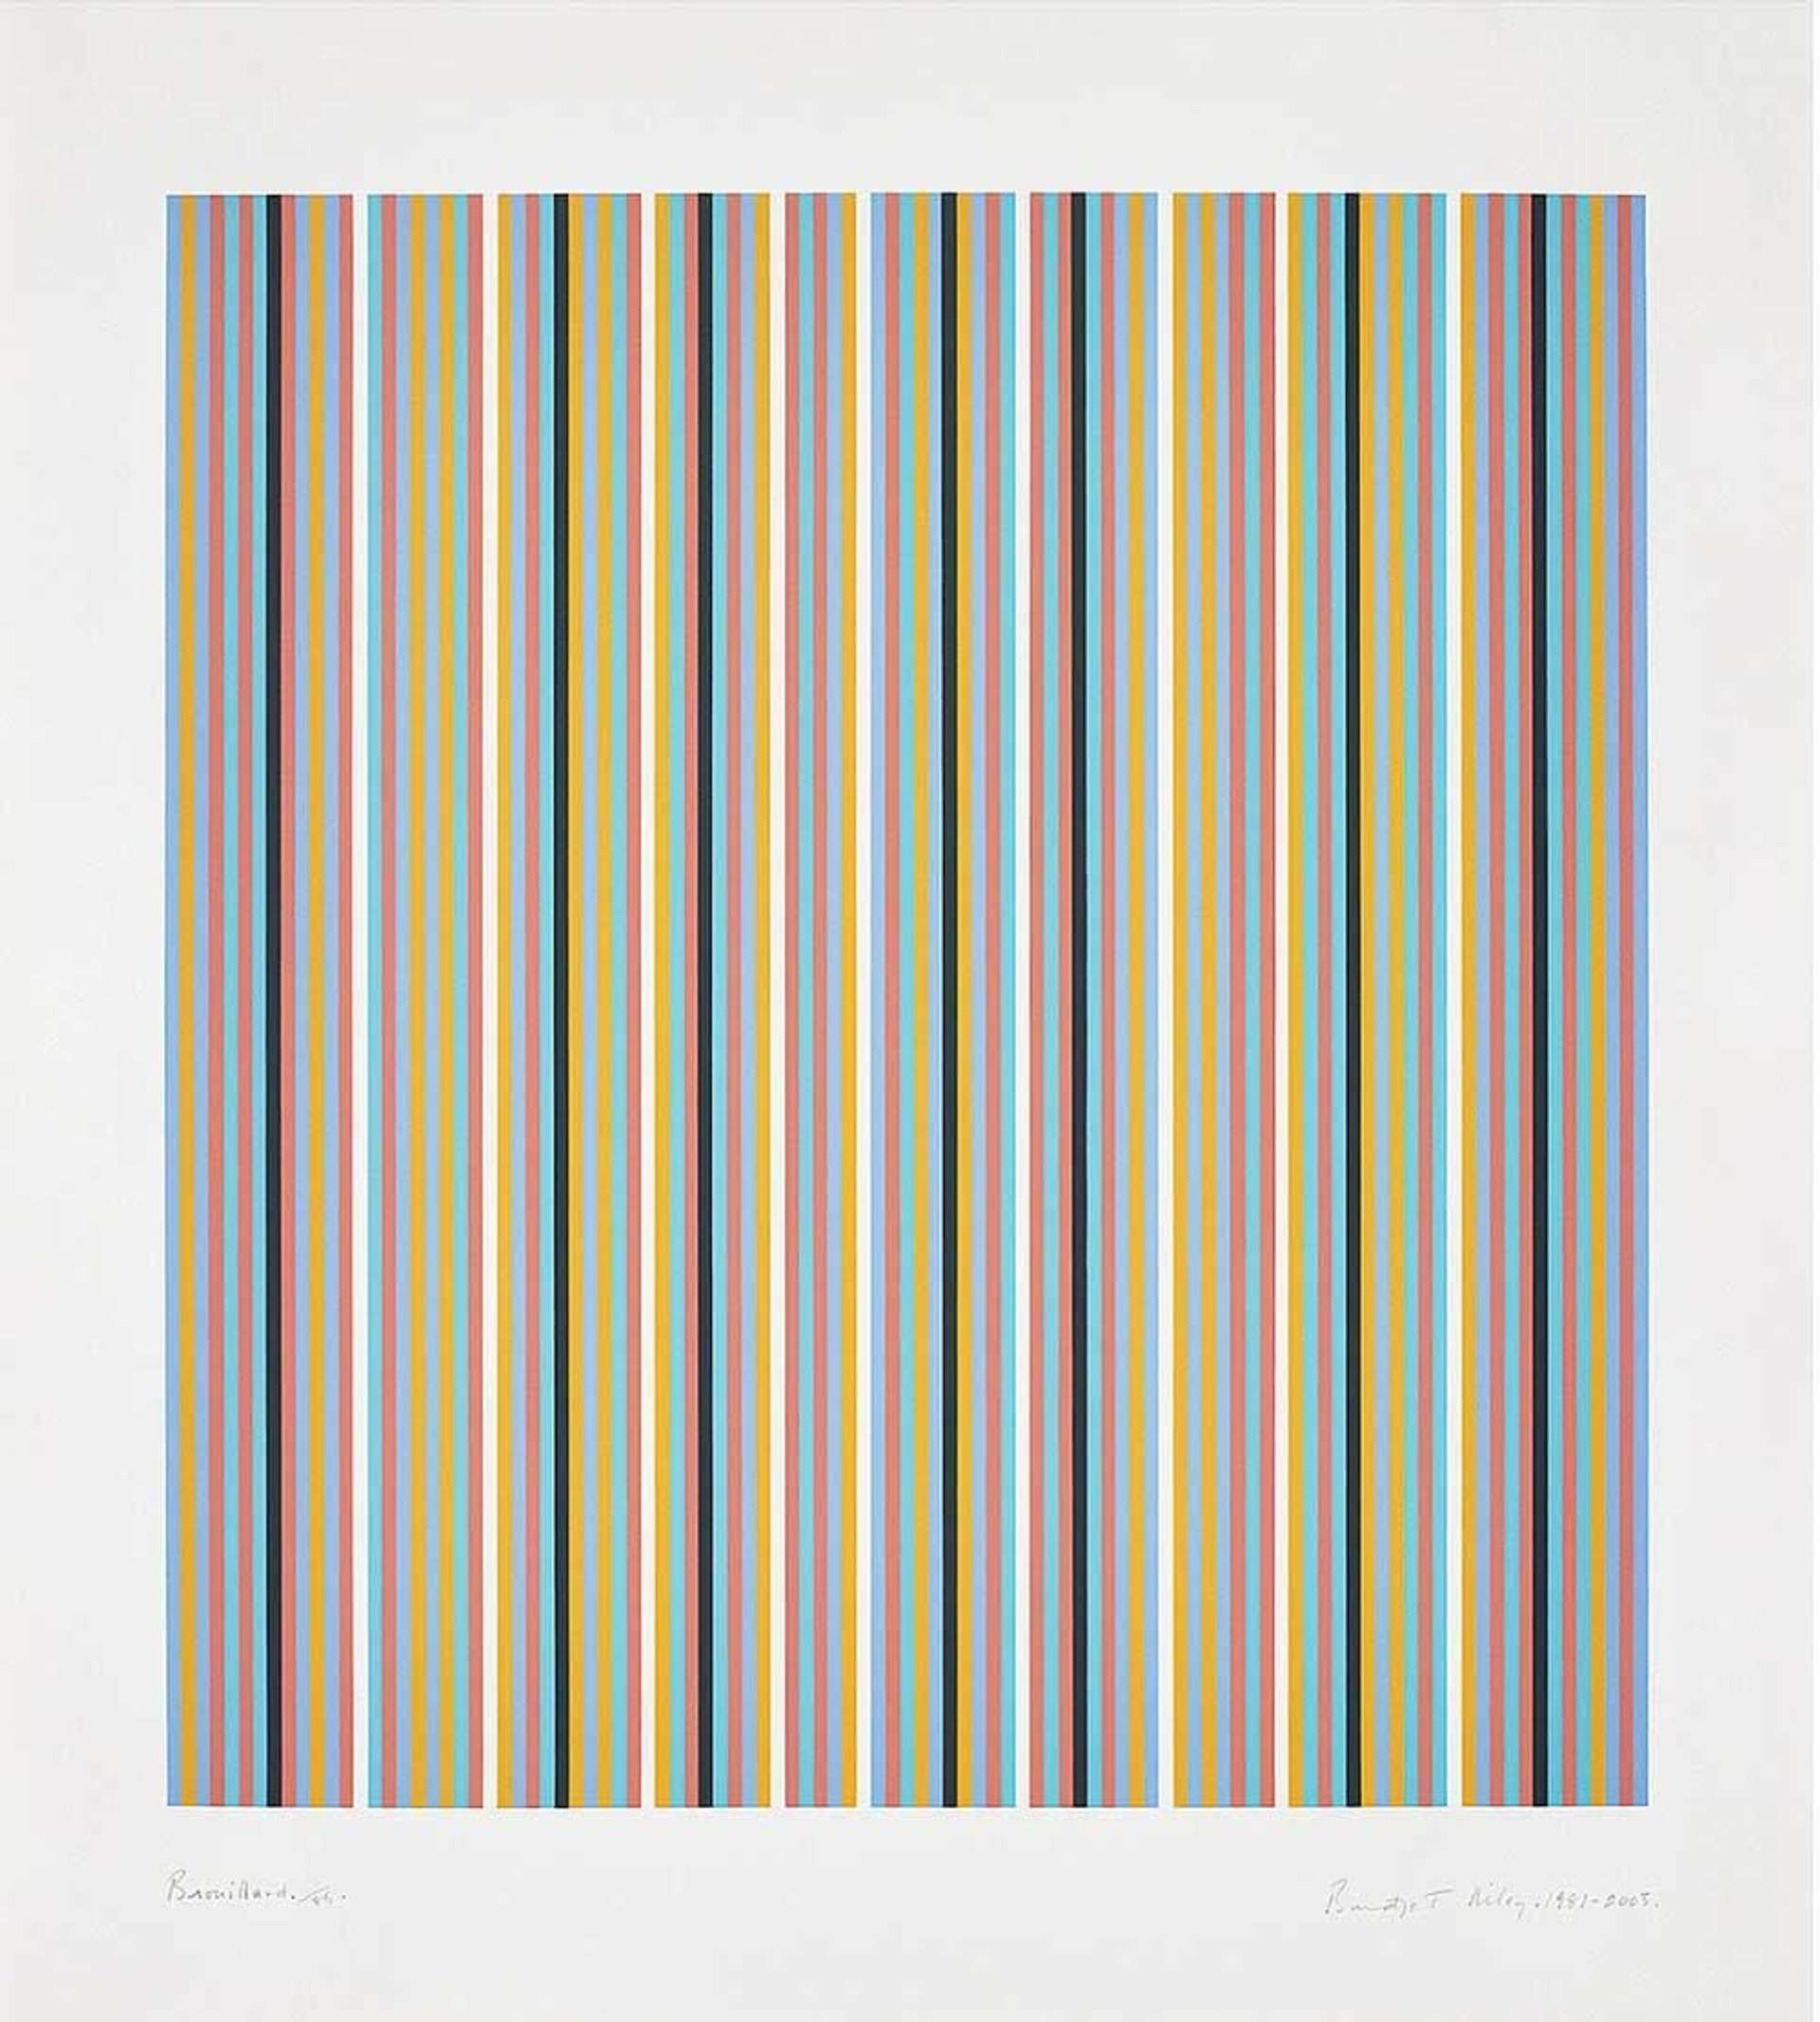 A Buyer's Guide to Bridget Riley